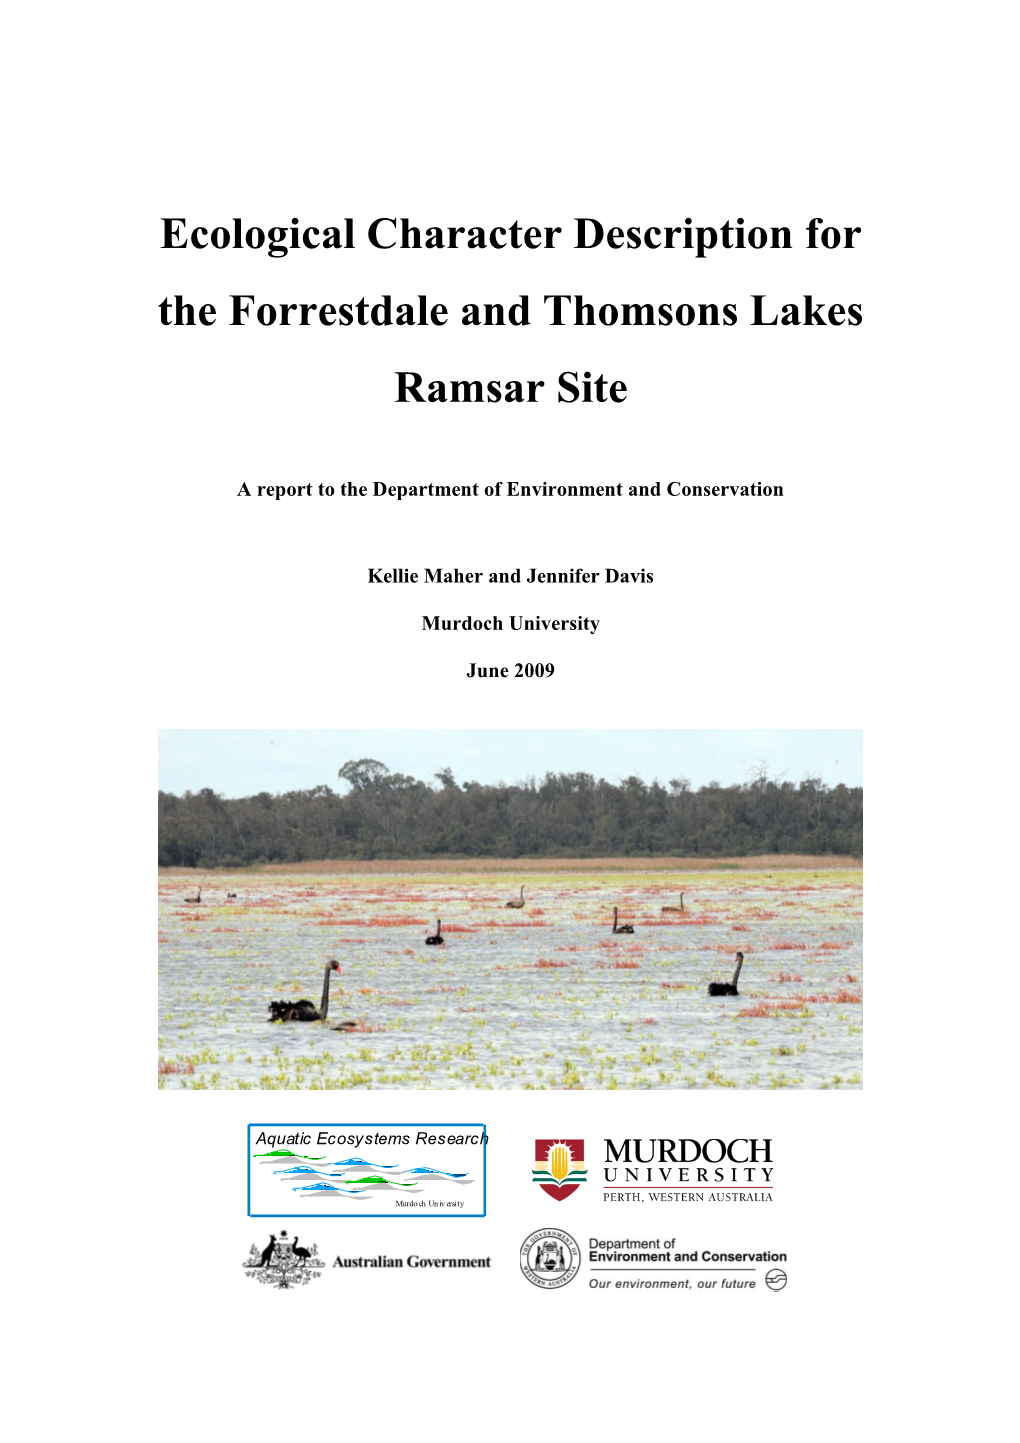 Ecological Character Description for the Forrestdale and Thomsons Lakes Ramsar Site